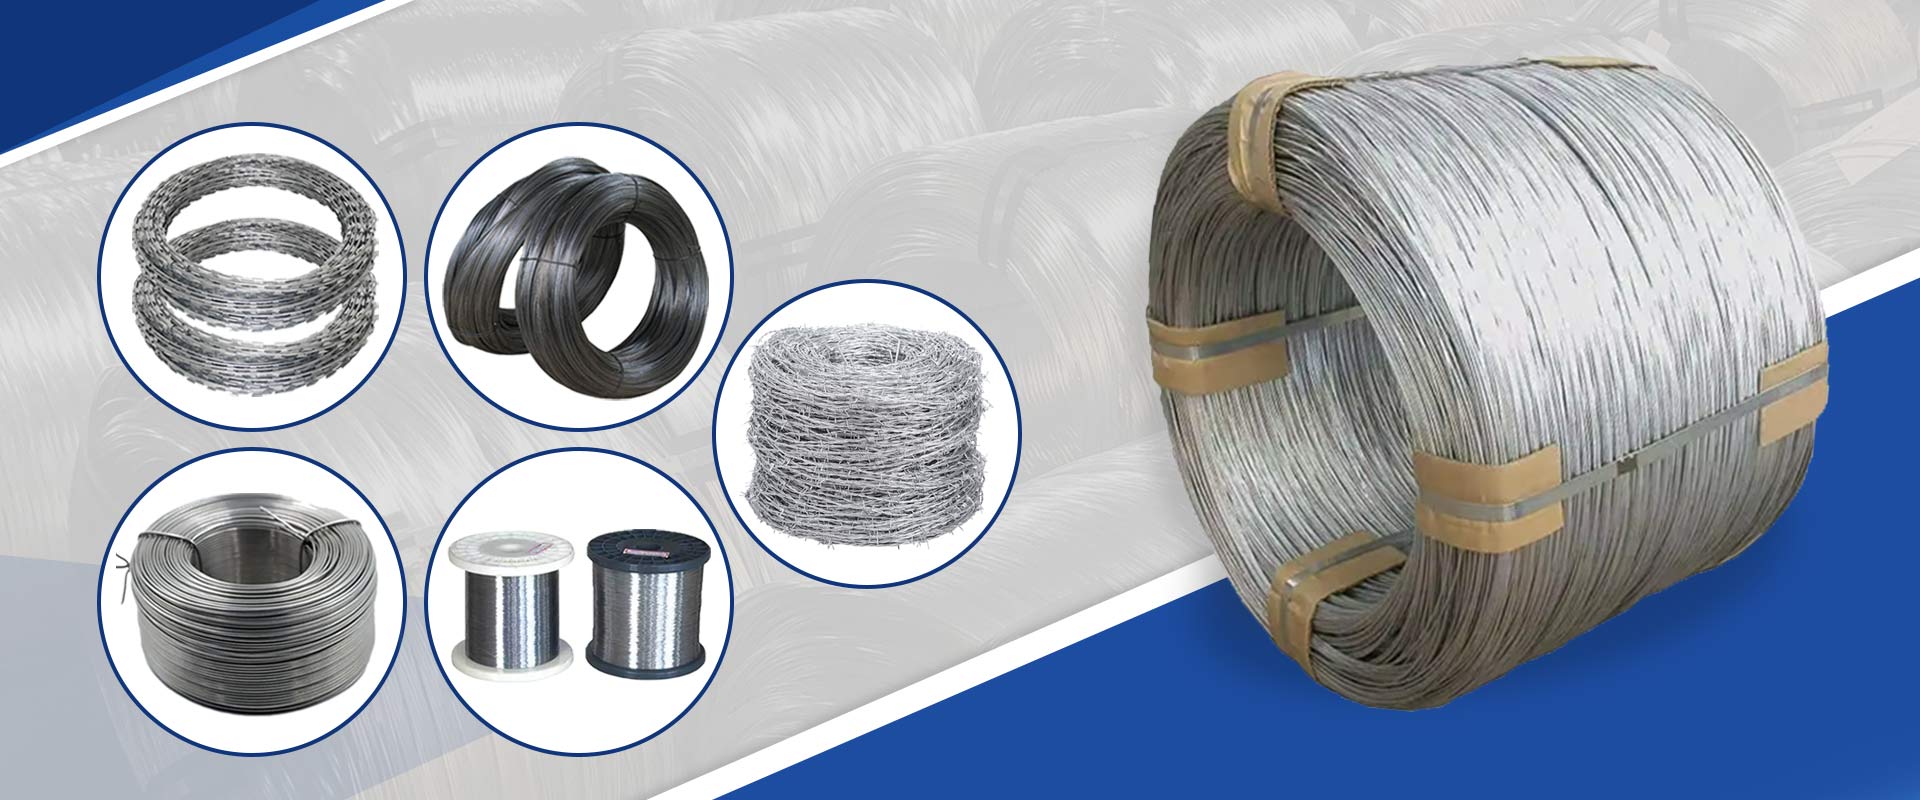 1-635 Mesh Production Capacity/500+ Filter Products/34 Different Metal Materials